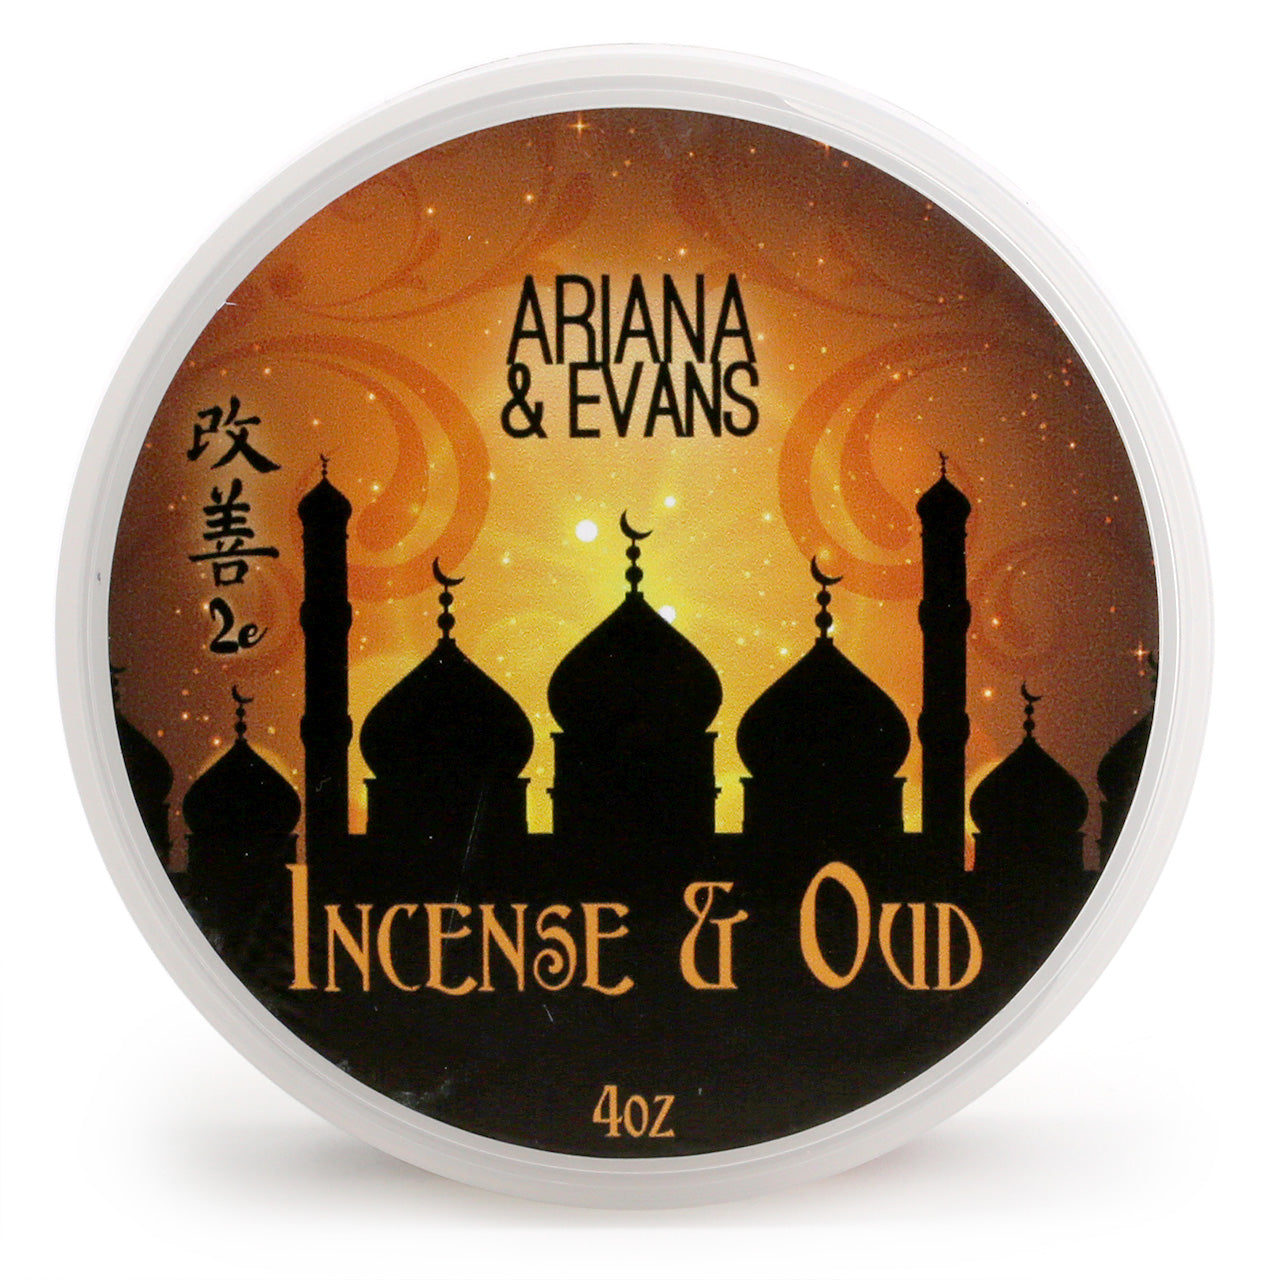 Incense & Oud Shaving Soap by Ariana & Evans top view